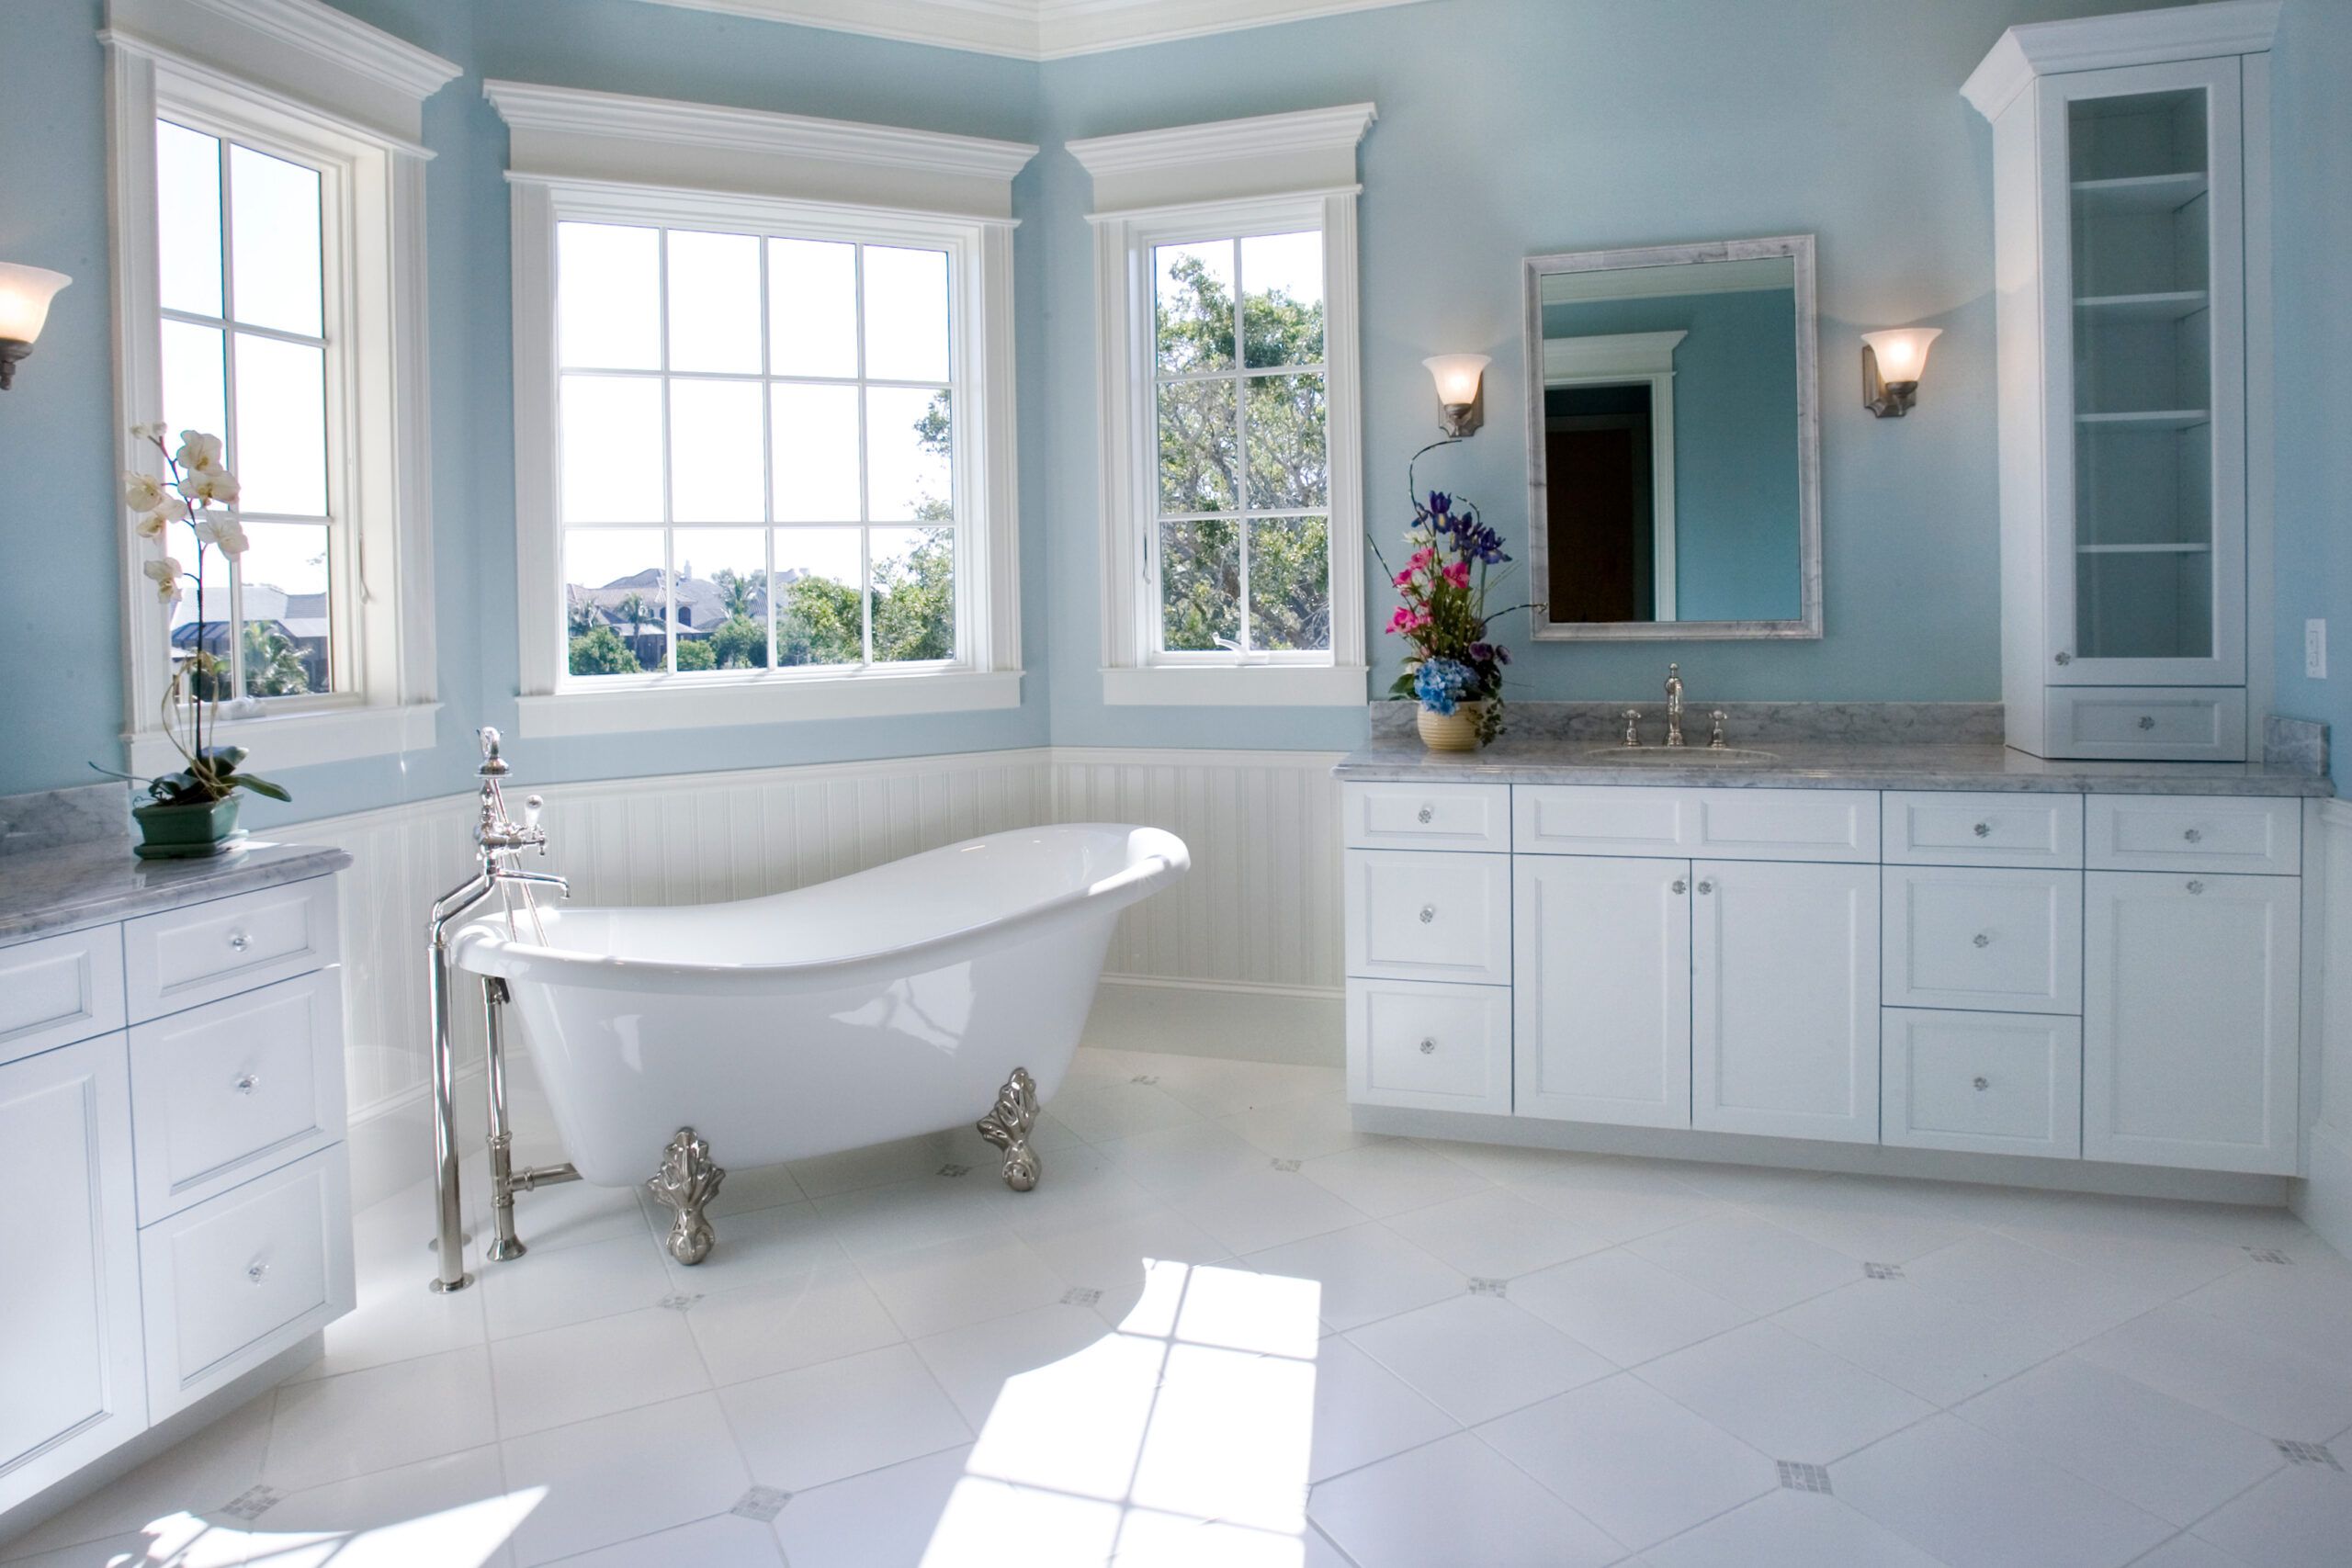 Overview of Paint Types for Bathrooms